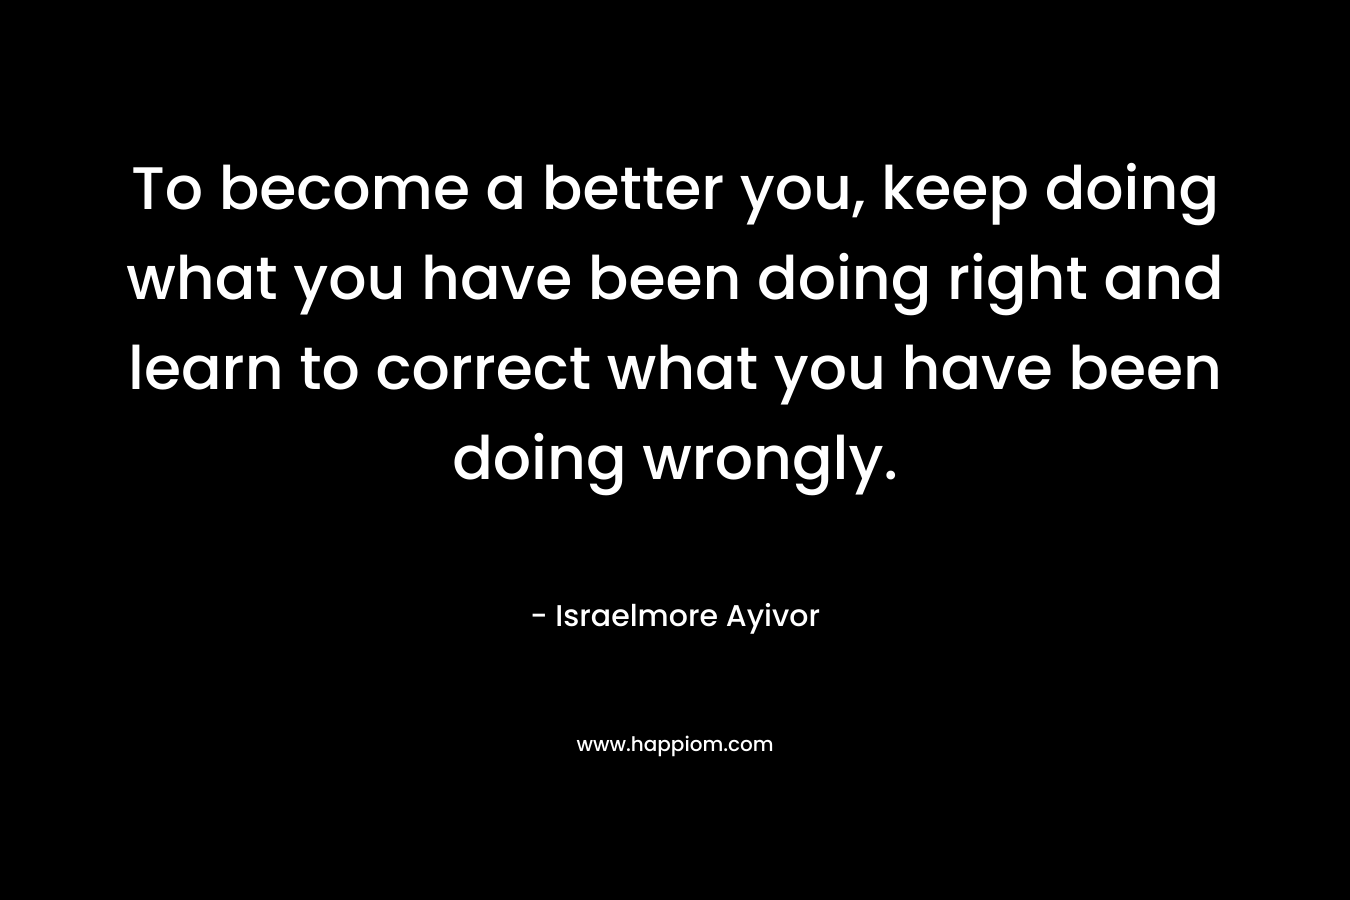 To become a better you, keep doing what you have been doing right and learn to correct what you have been doing wrongly.